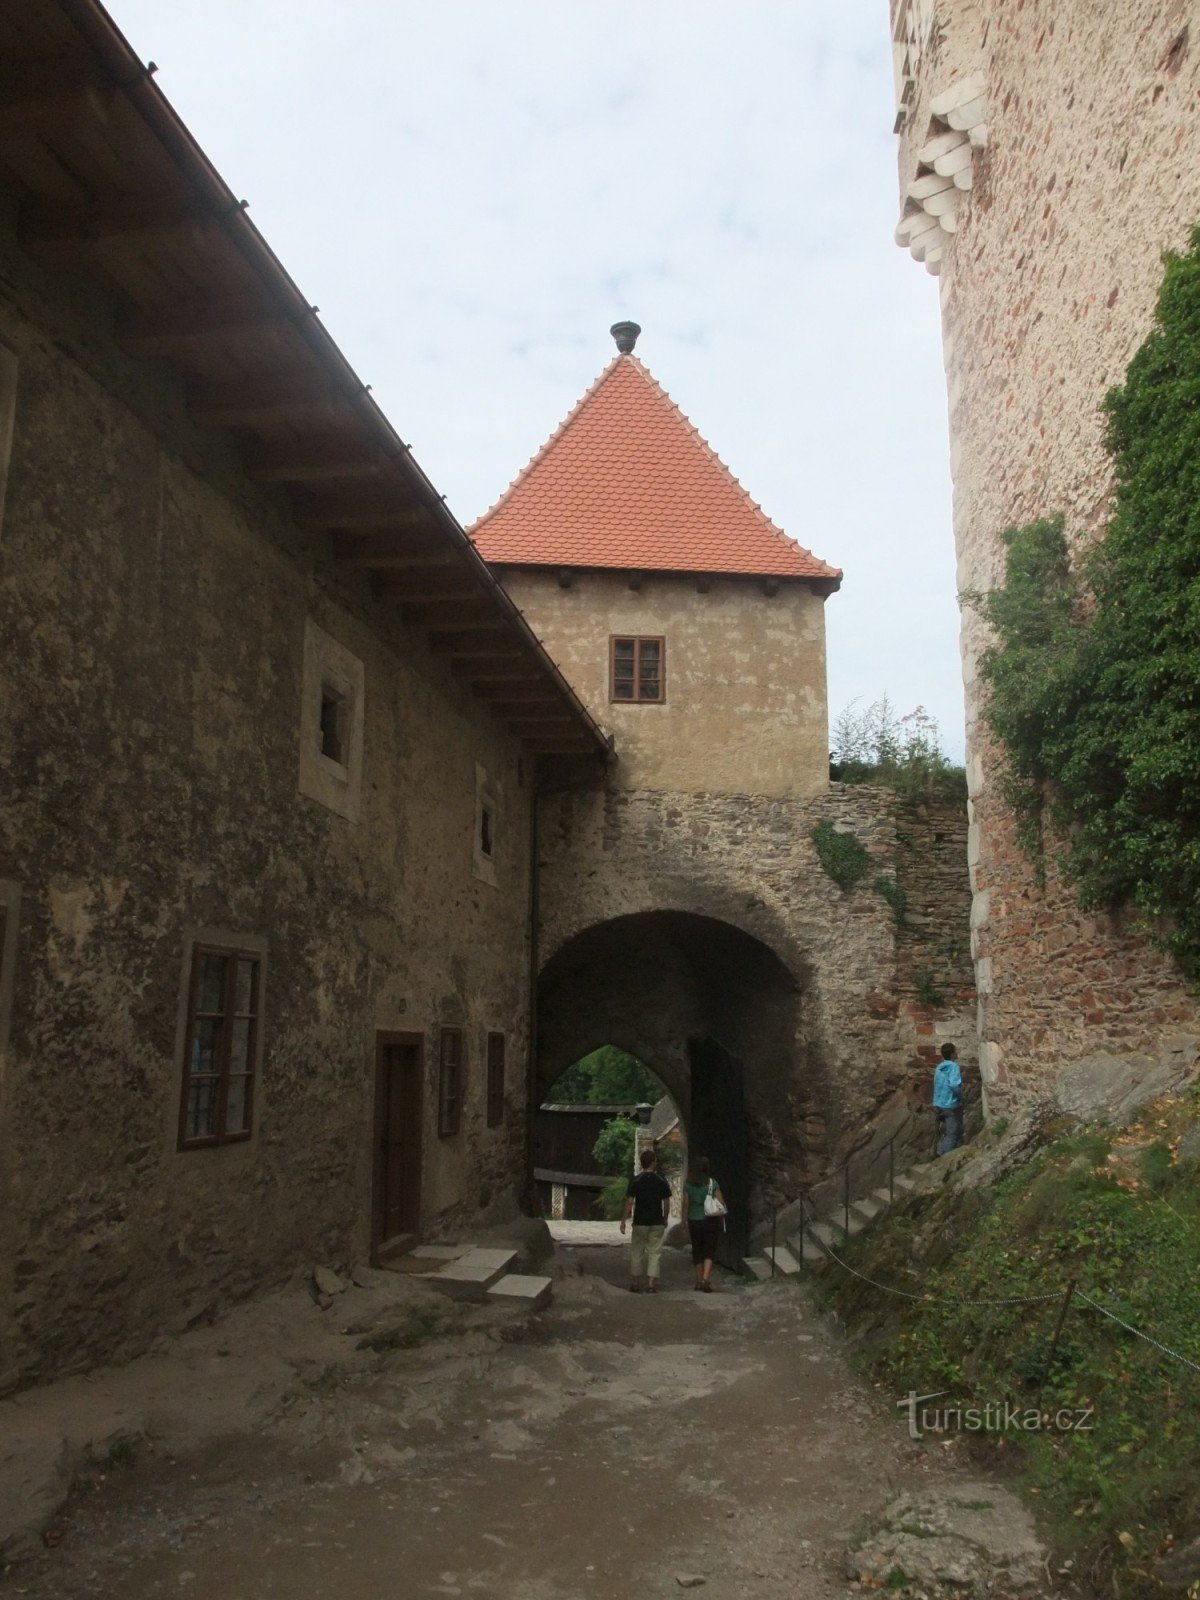 Entrance road to the castle